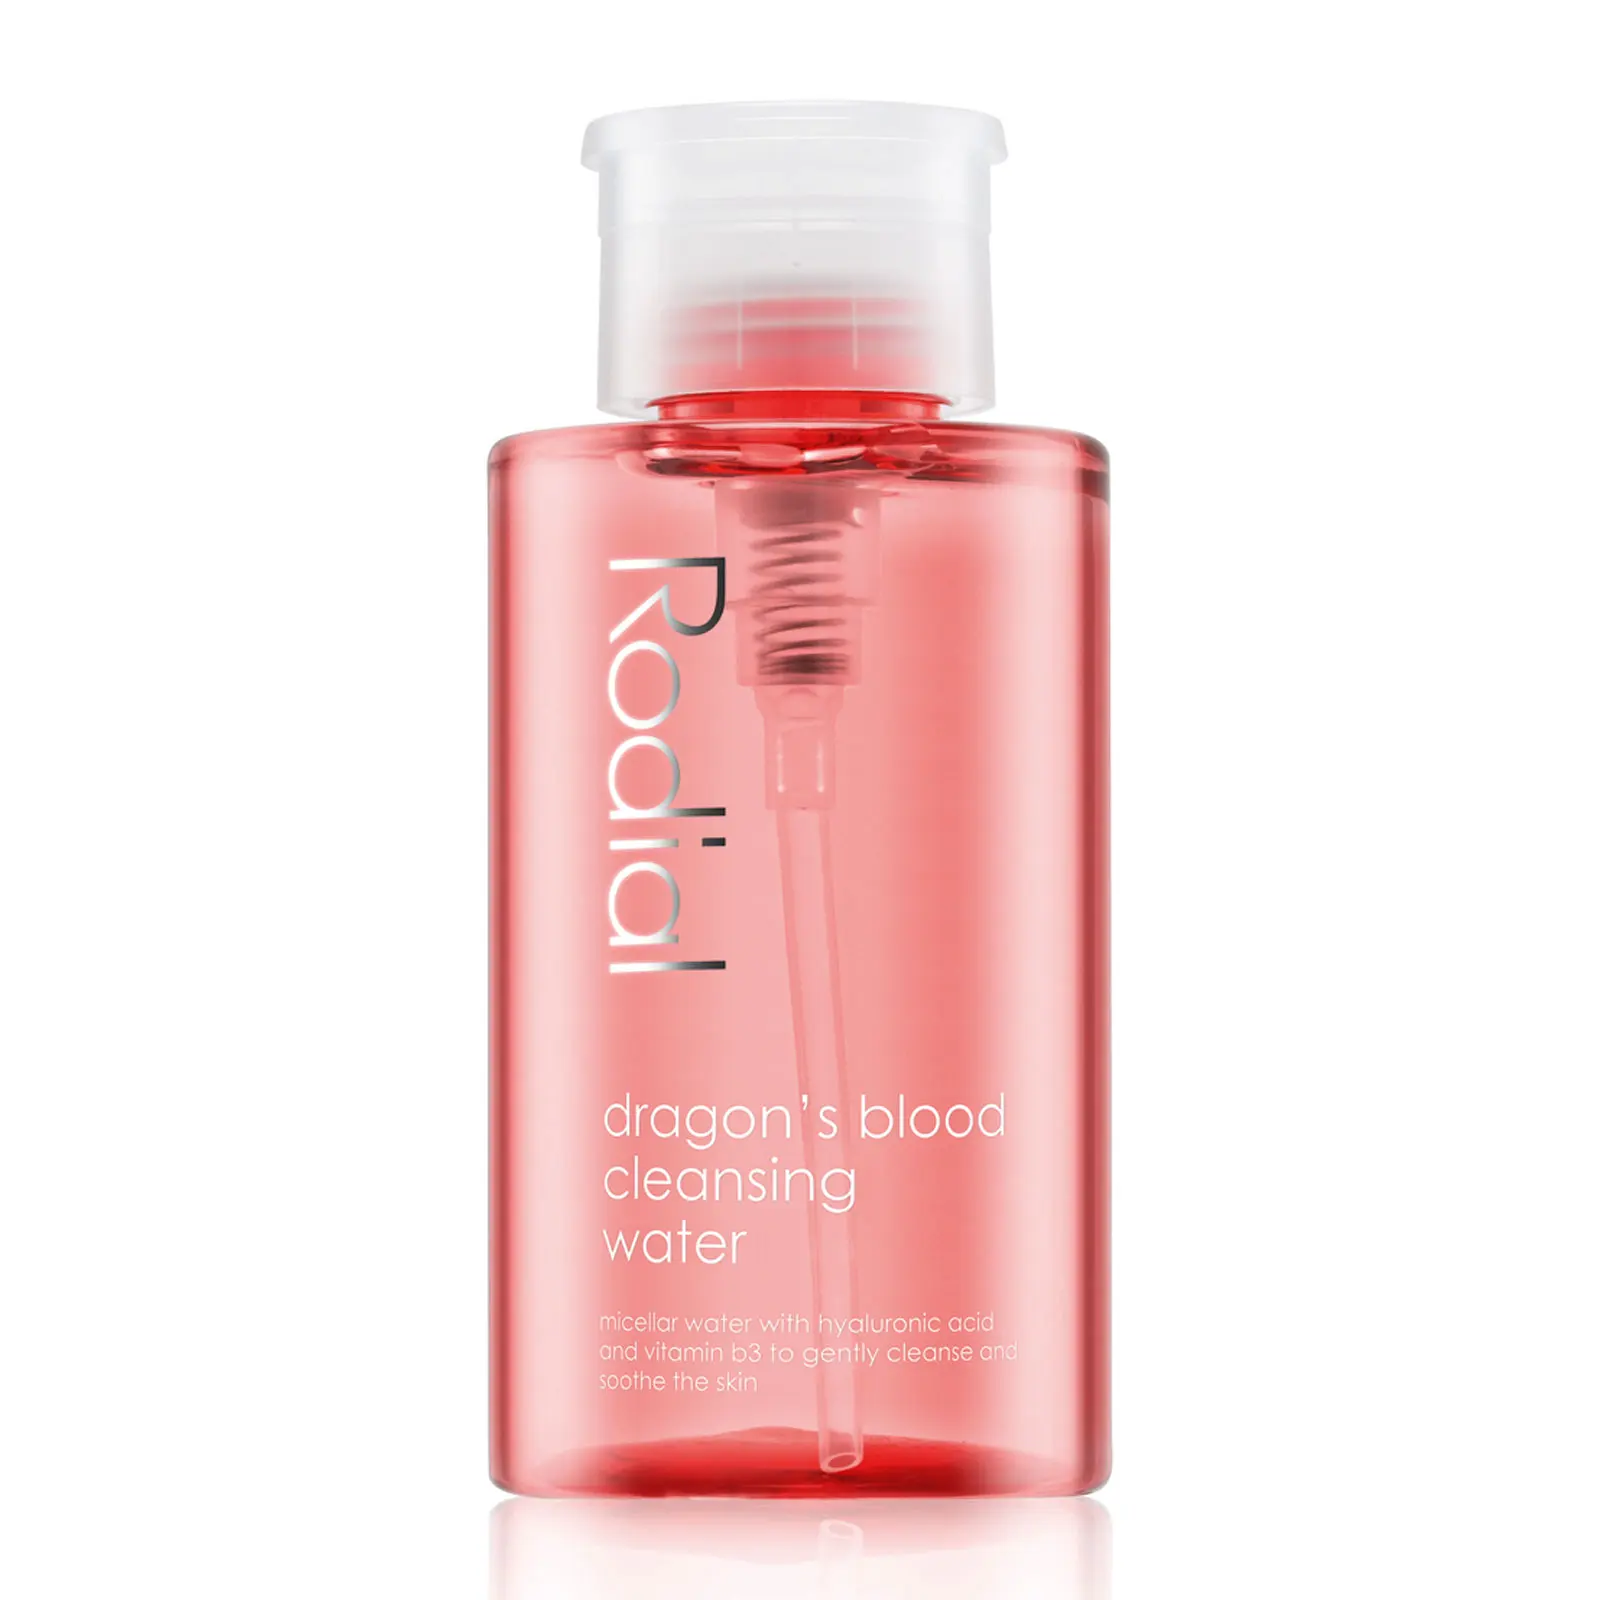 Rodial Dragon's Blood Cleansing Water 300ml Discounts and Cashback